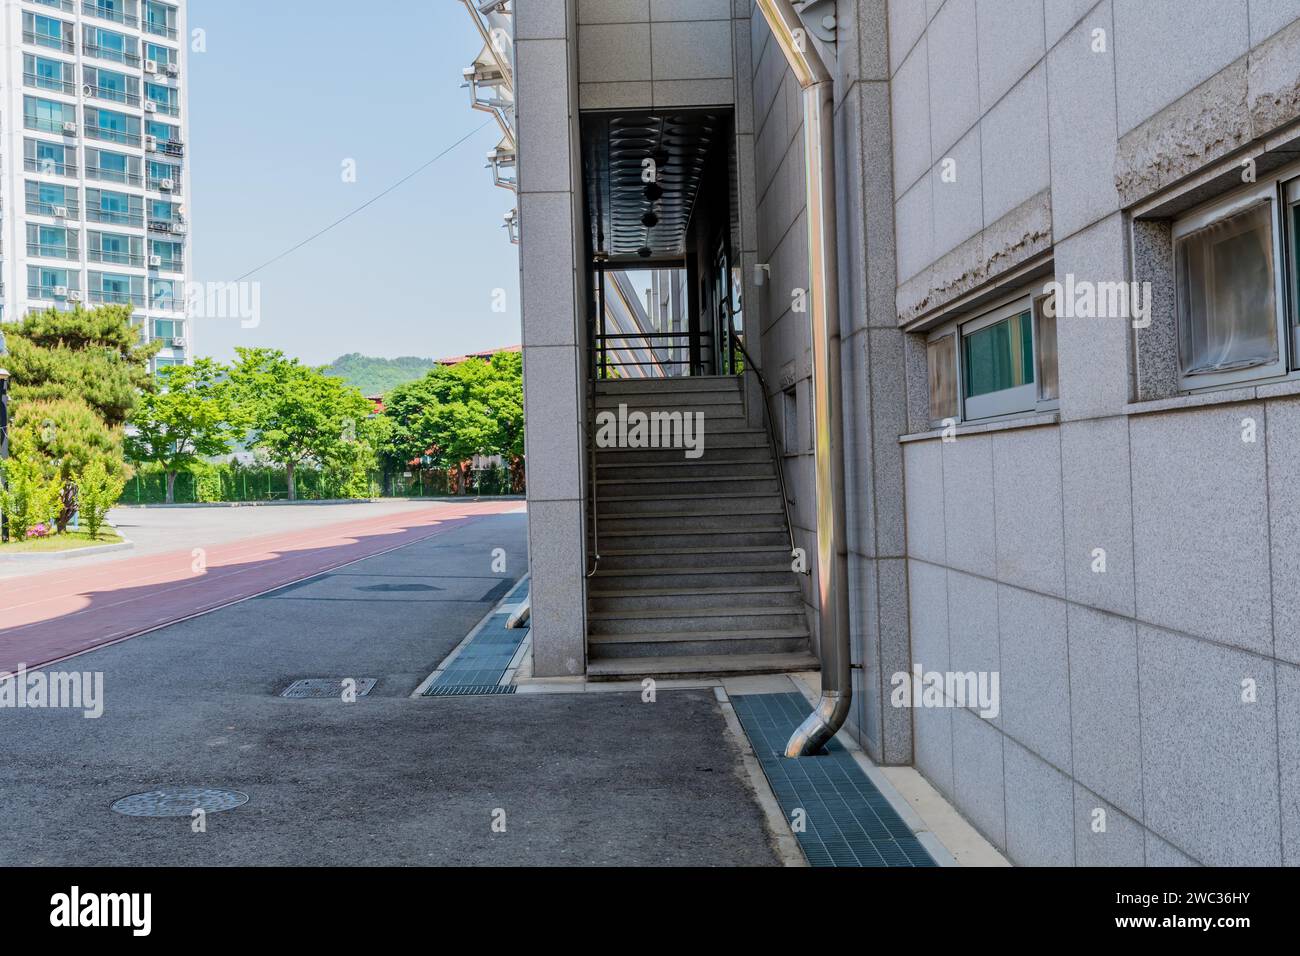 Rear entrance stairway into sports stadium with vacant paved lot, trees and blue sky in background Stock Photo